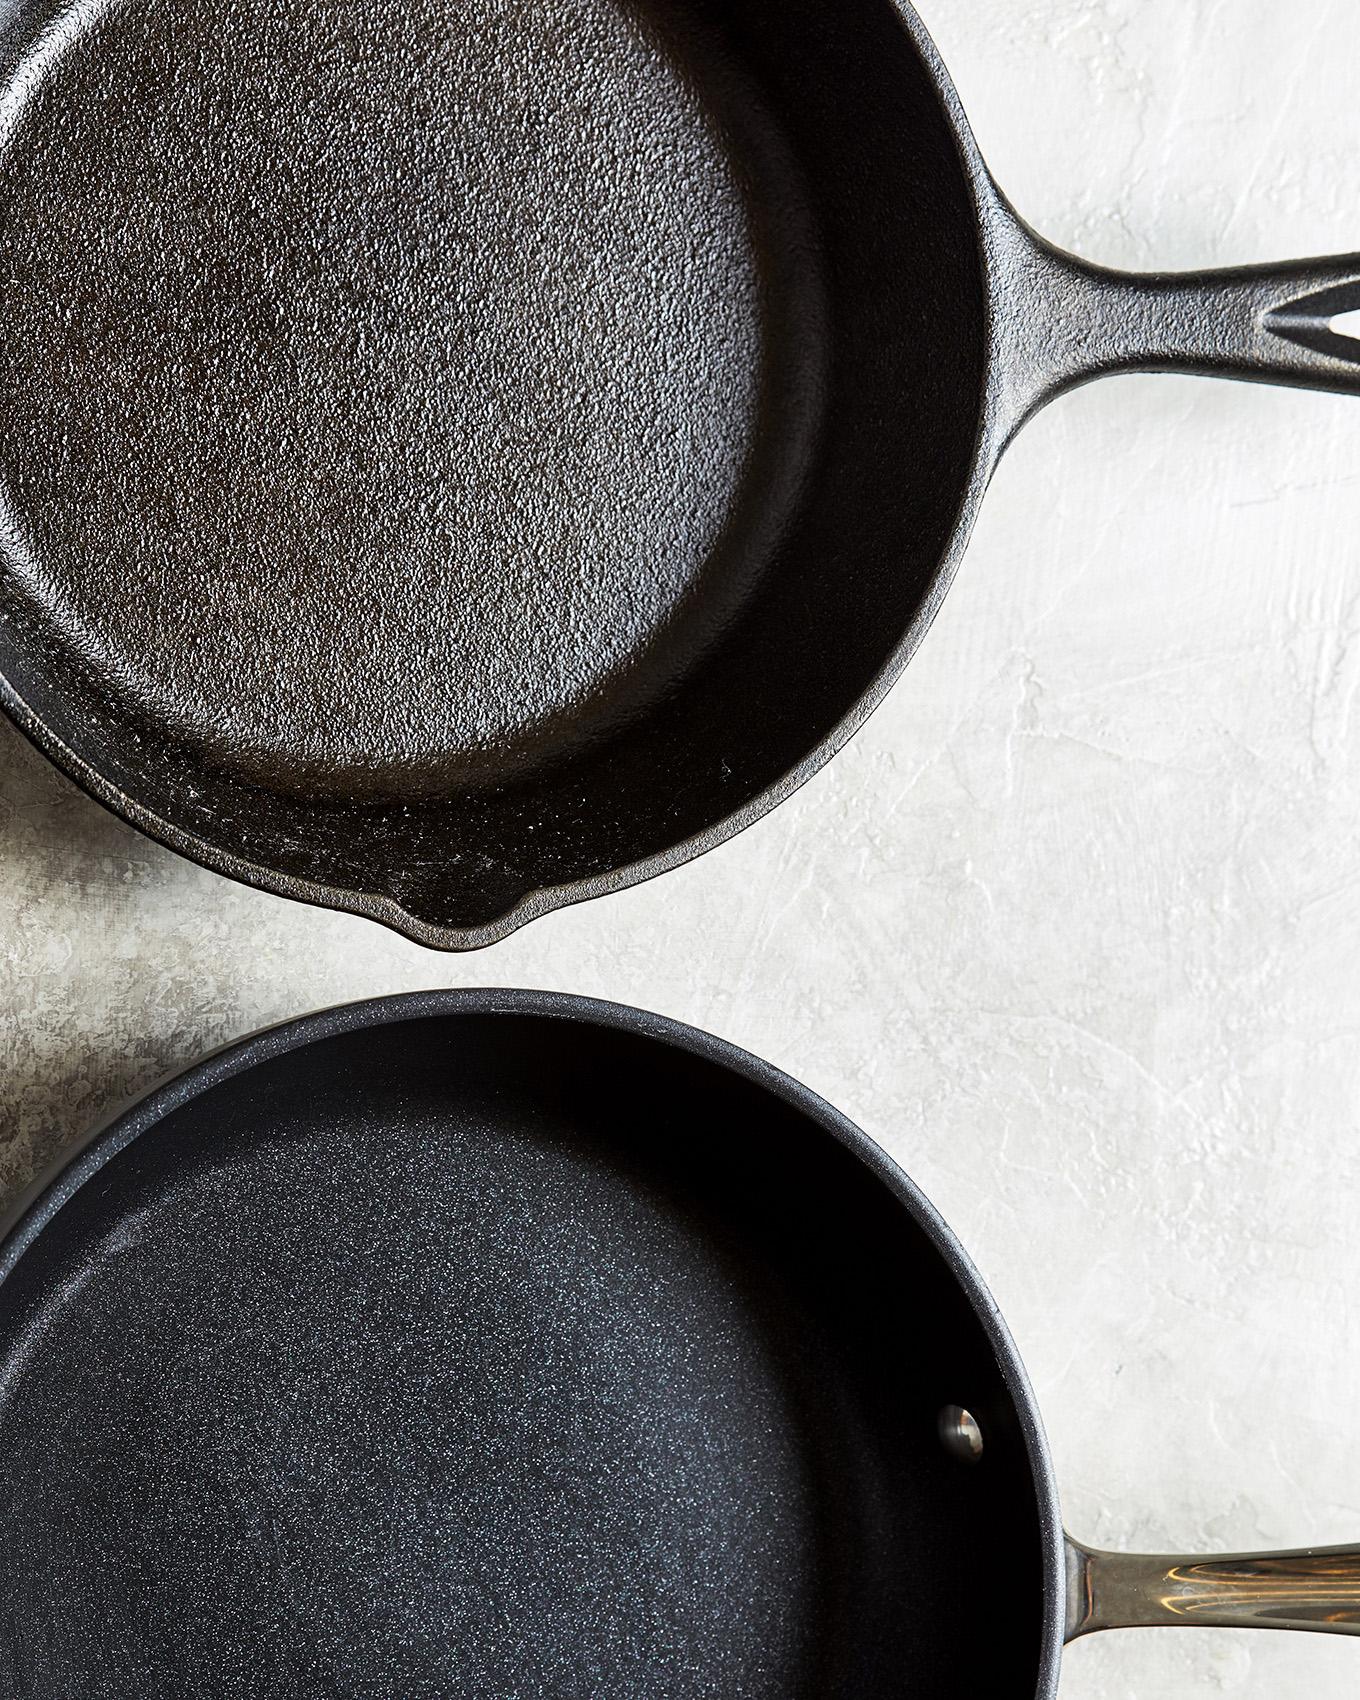 Cast-iron vs. nonstick skillets: How to choose the right pan